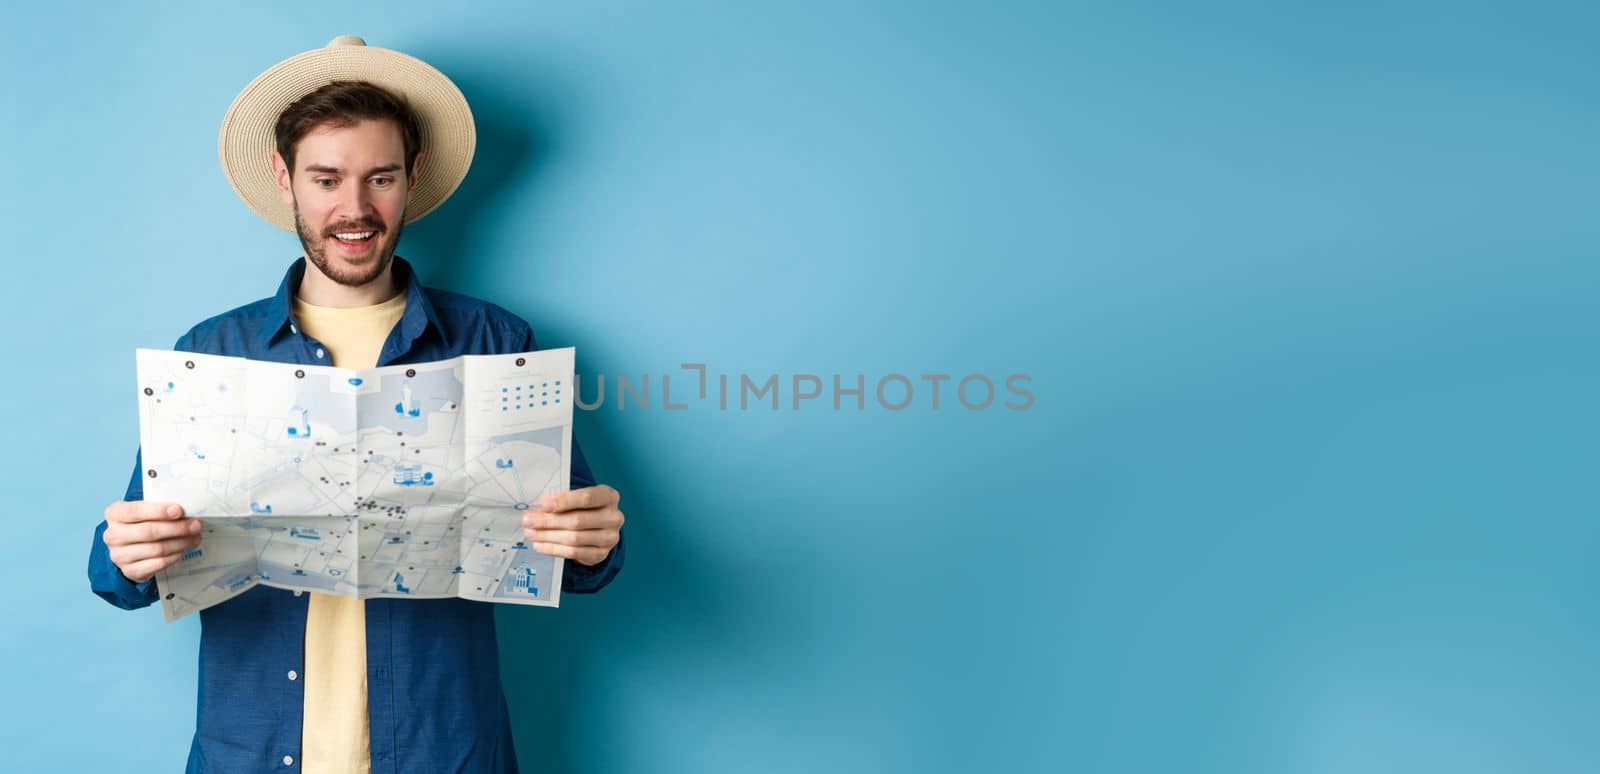 Cheerful tourist in summer hat planning travel route on vacation, looking at sighseeing map and smiling excited, standing on blue background.